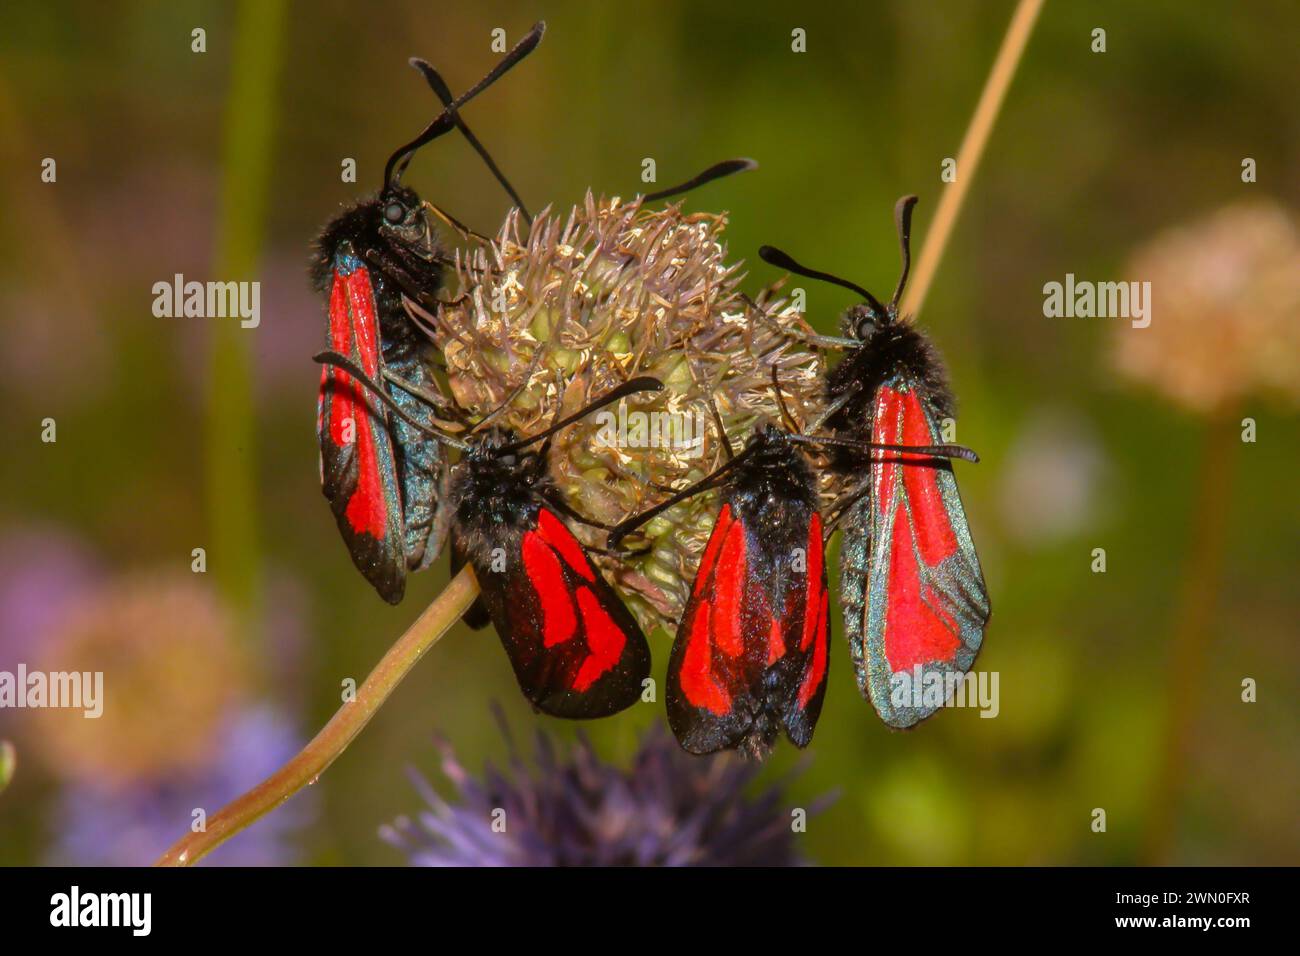 Red moth in nature on macro flowers in a natural environment Stock Photo